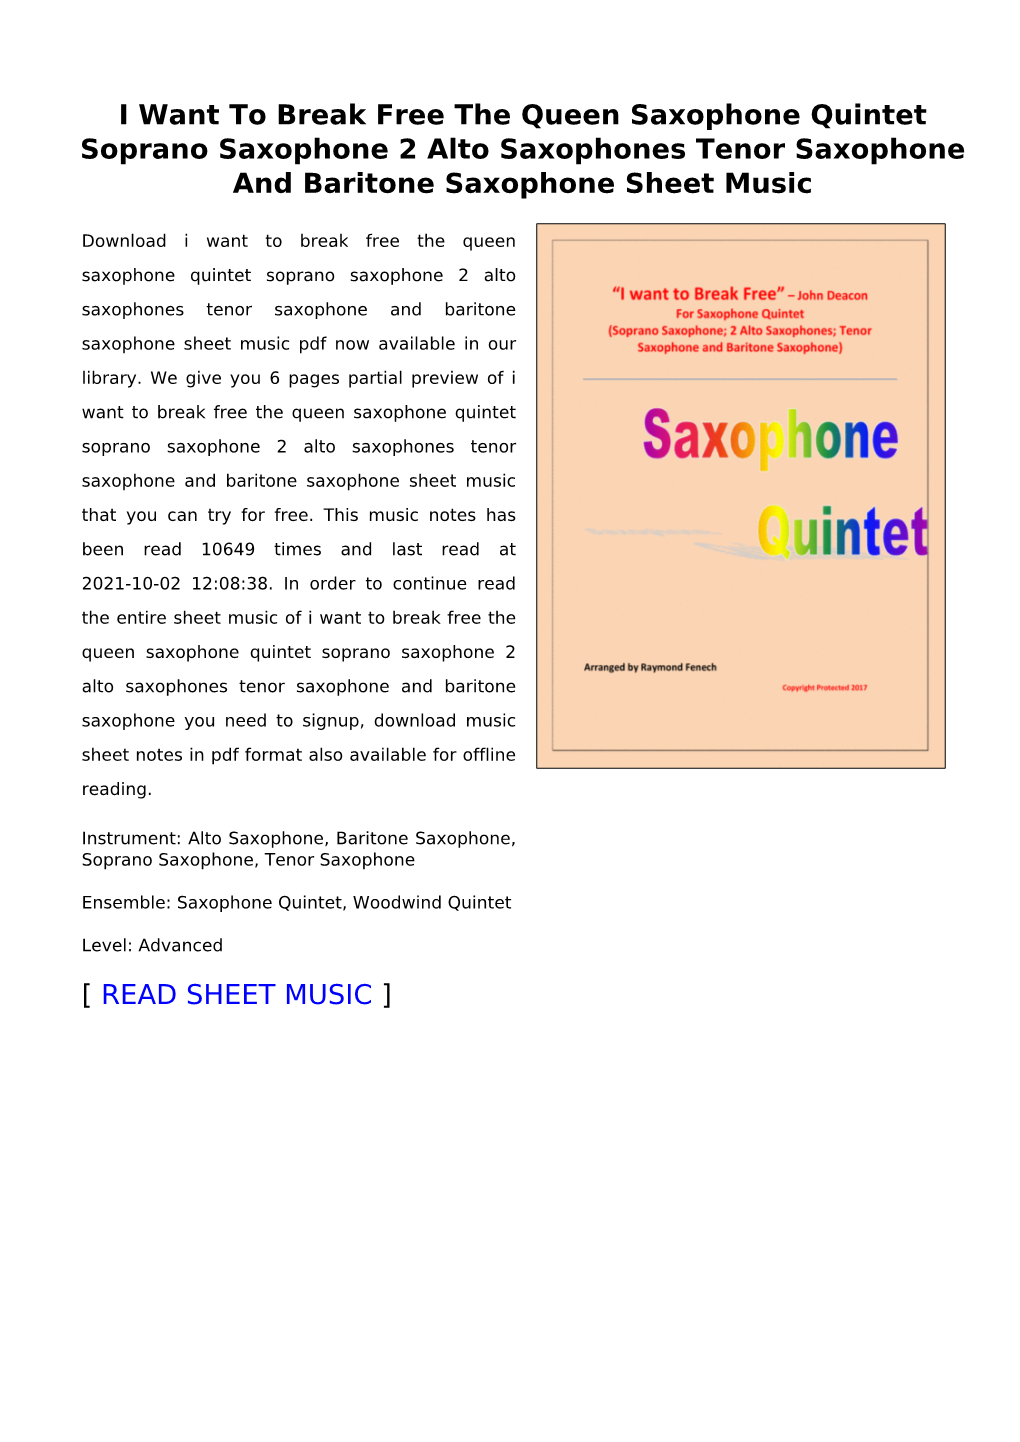 Sheet Music of I Want to Break Free the Queen Saxophone Quintet